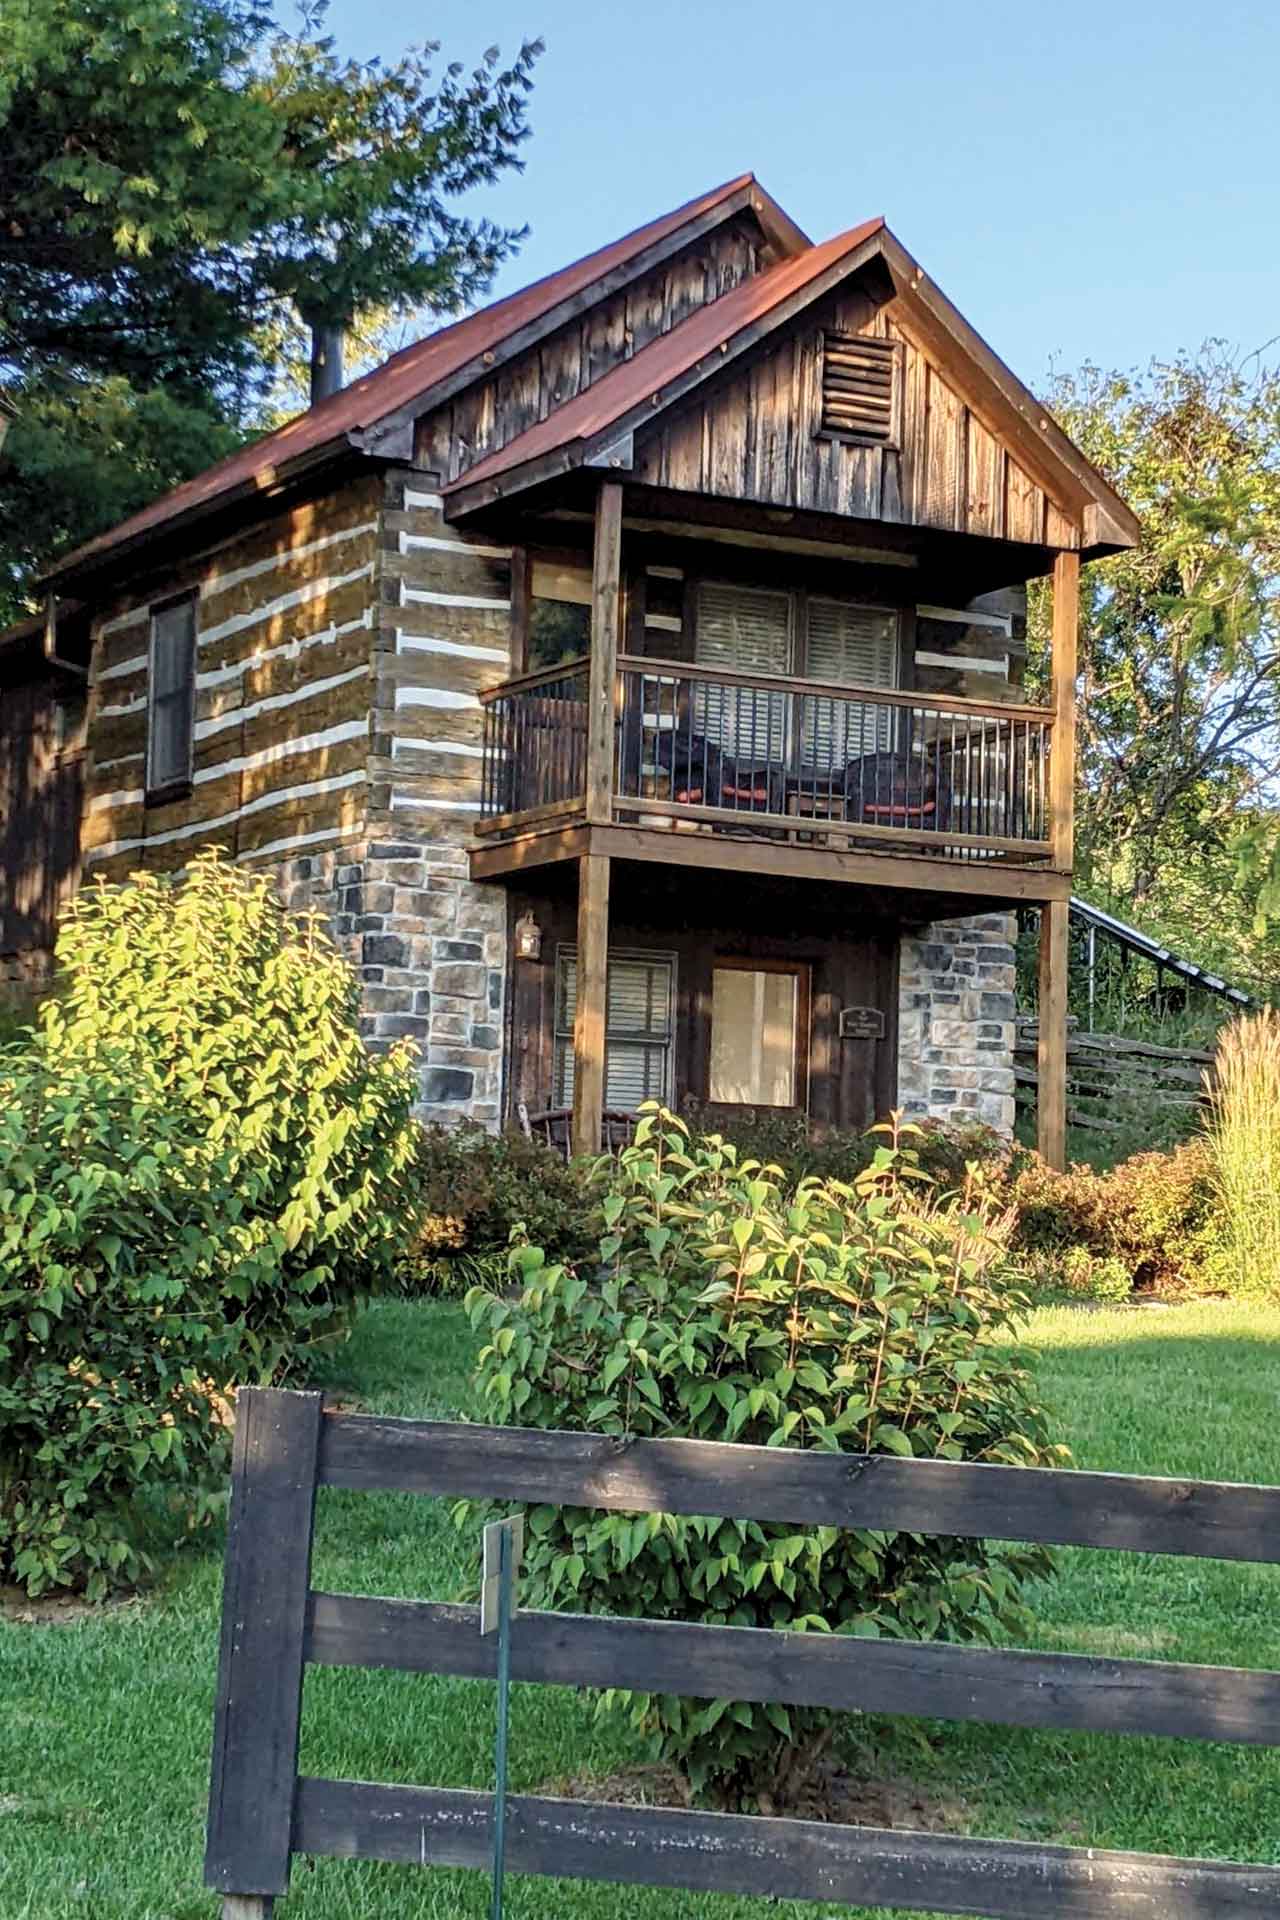 A rustic two story log cabin